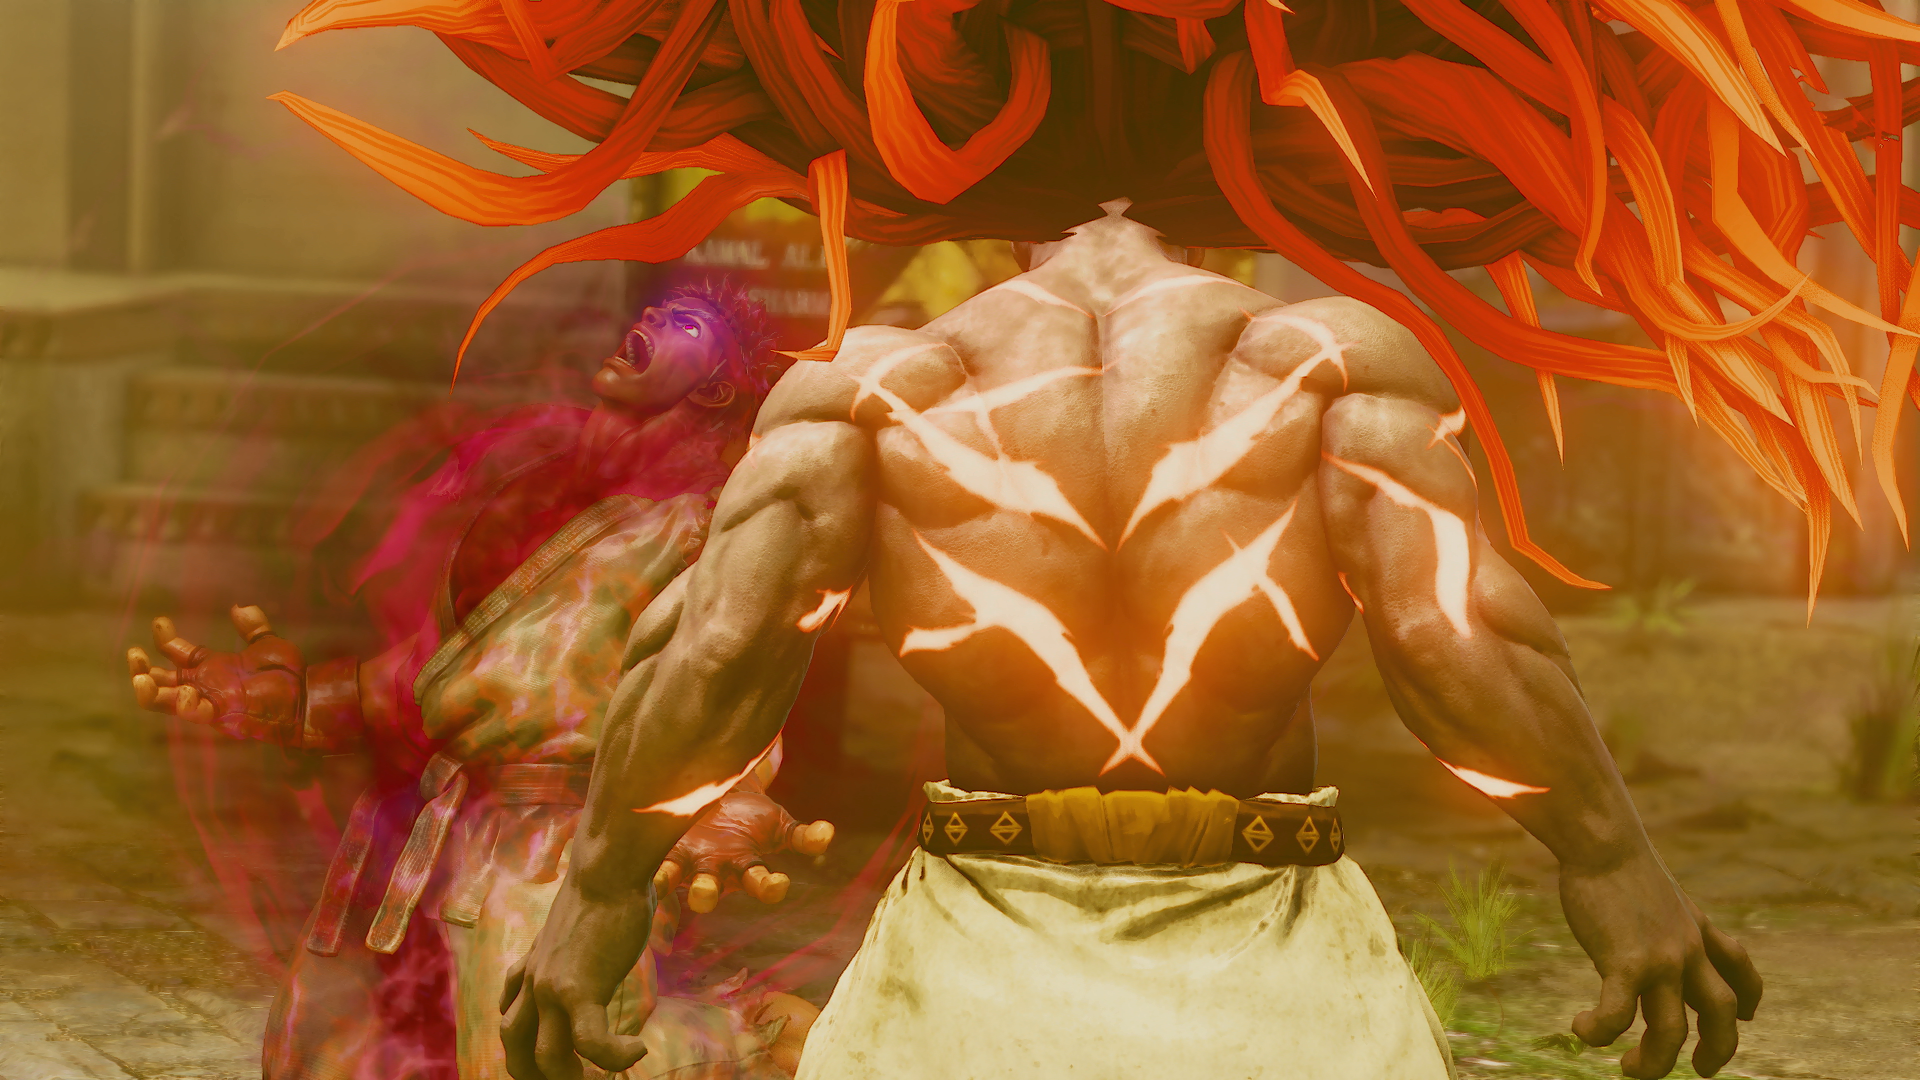 Capcom Debuts Season 2 Of STREET FIGHTER V With Akuma And 92 Pages